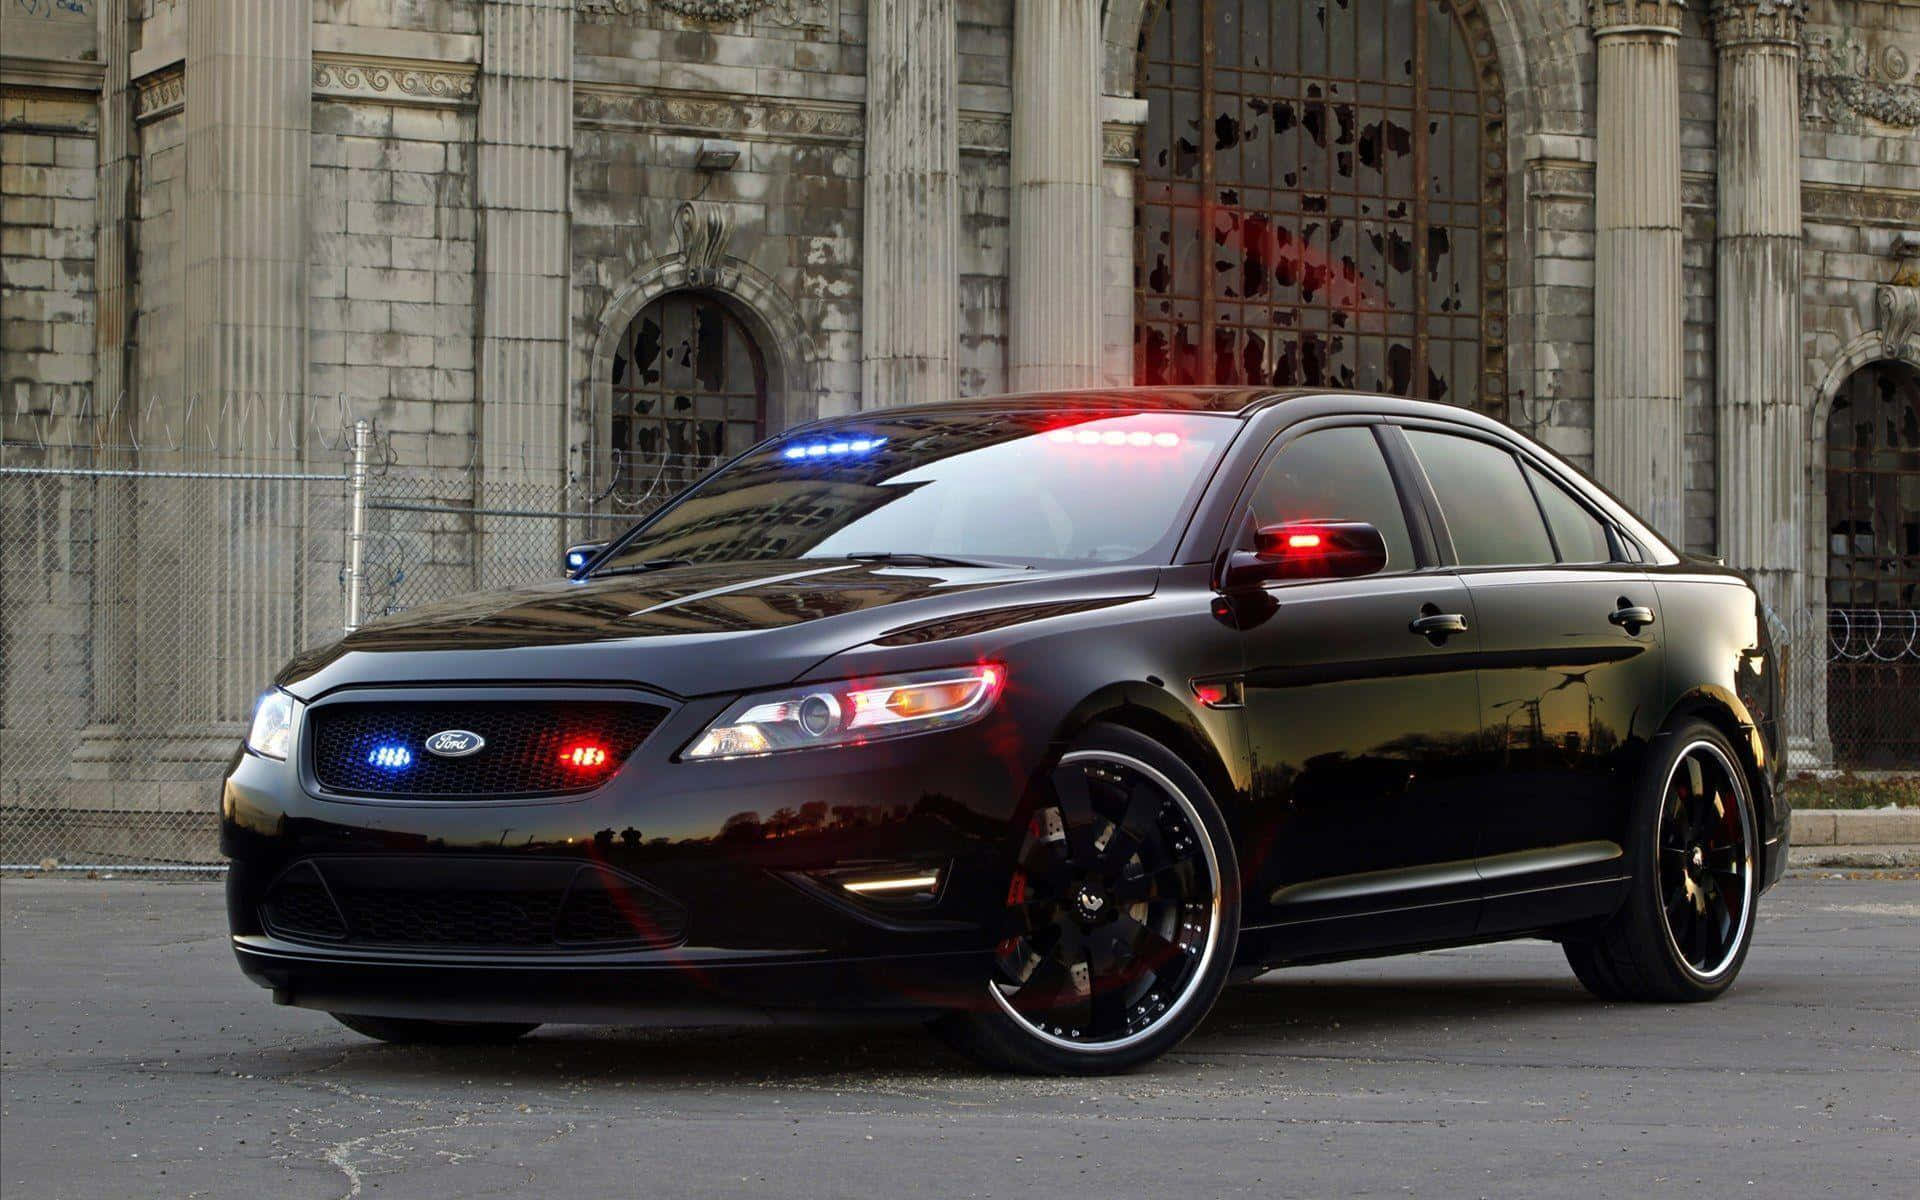 The Ultimate Law Enforcement Tool - Police Car